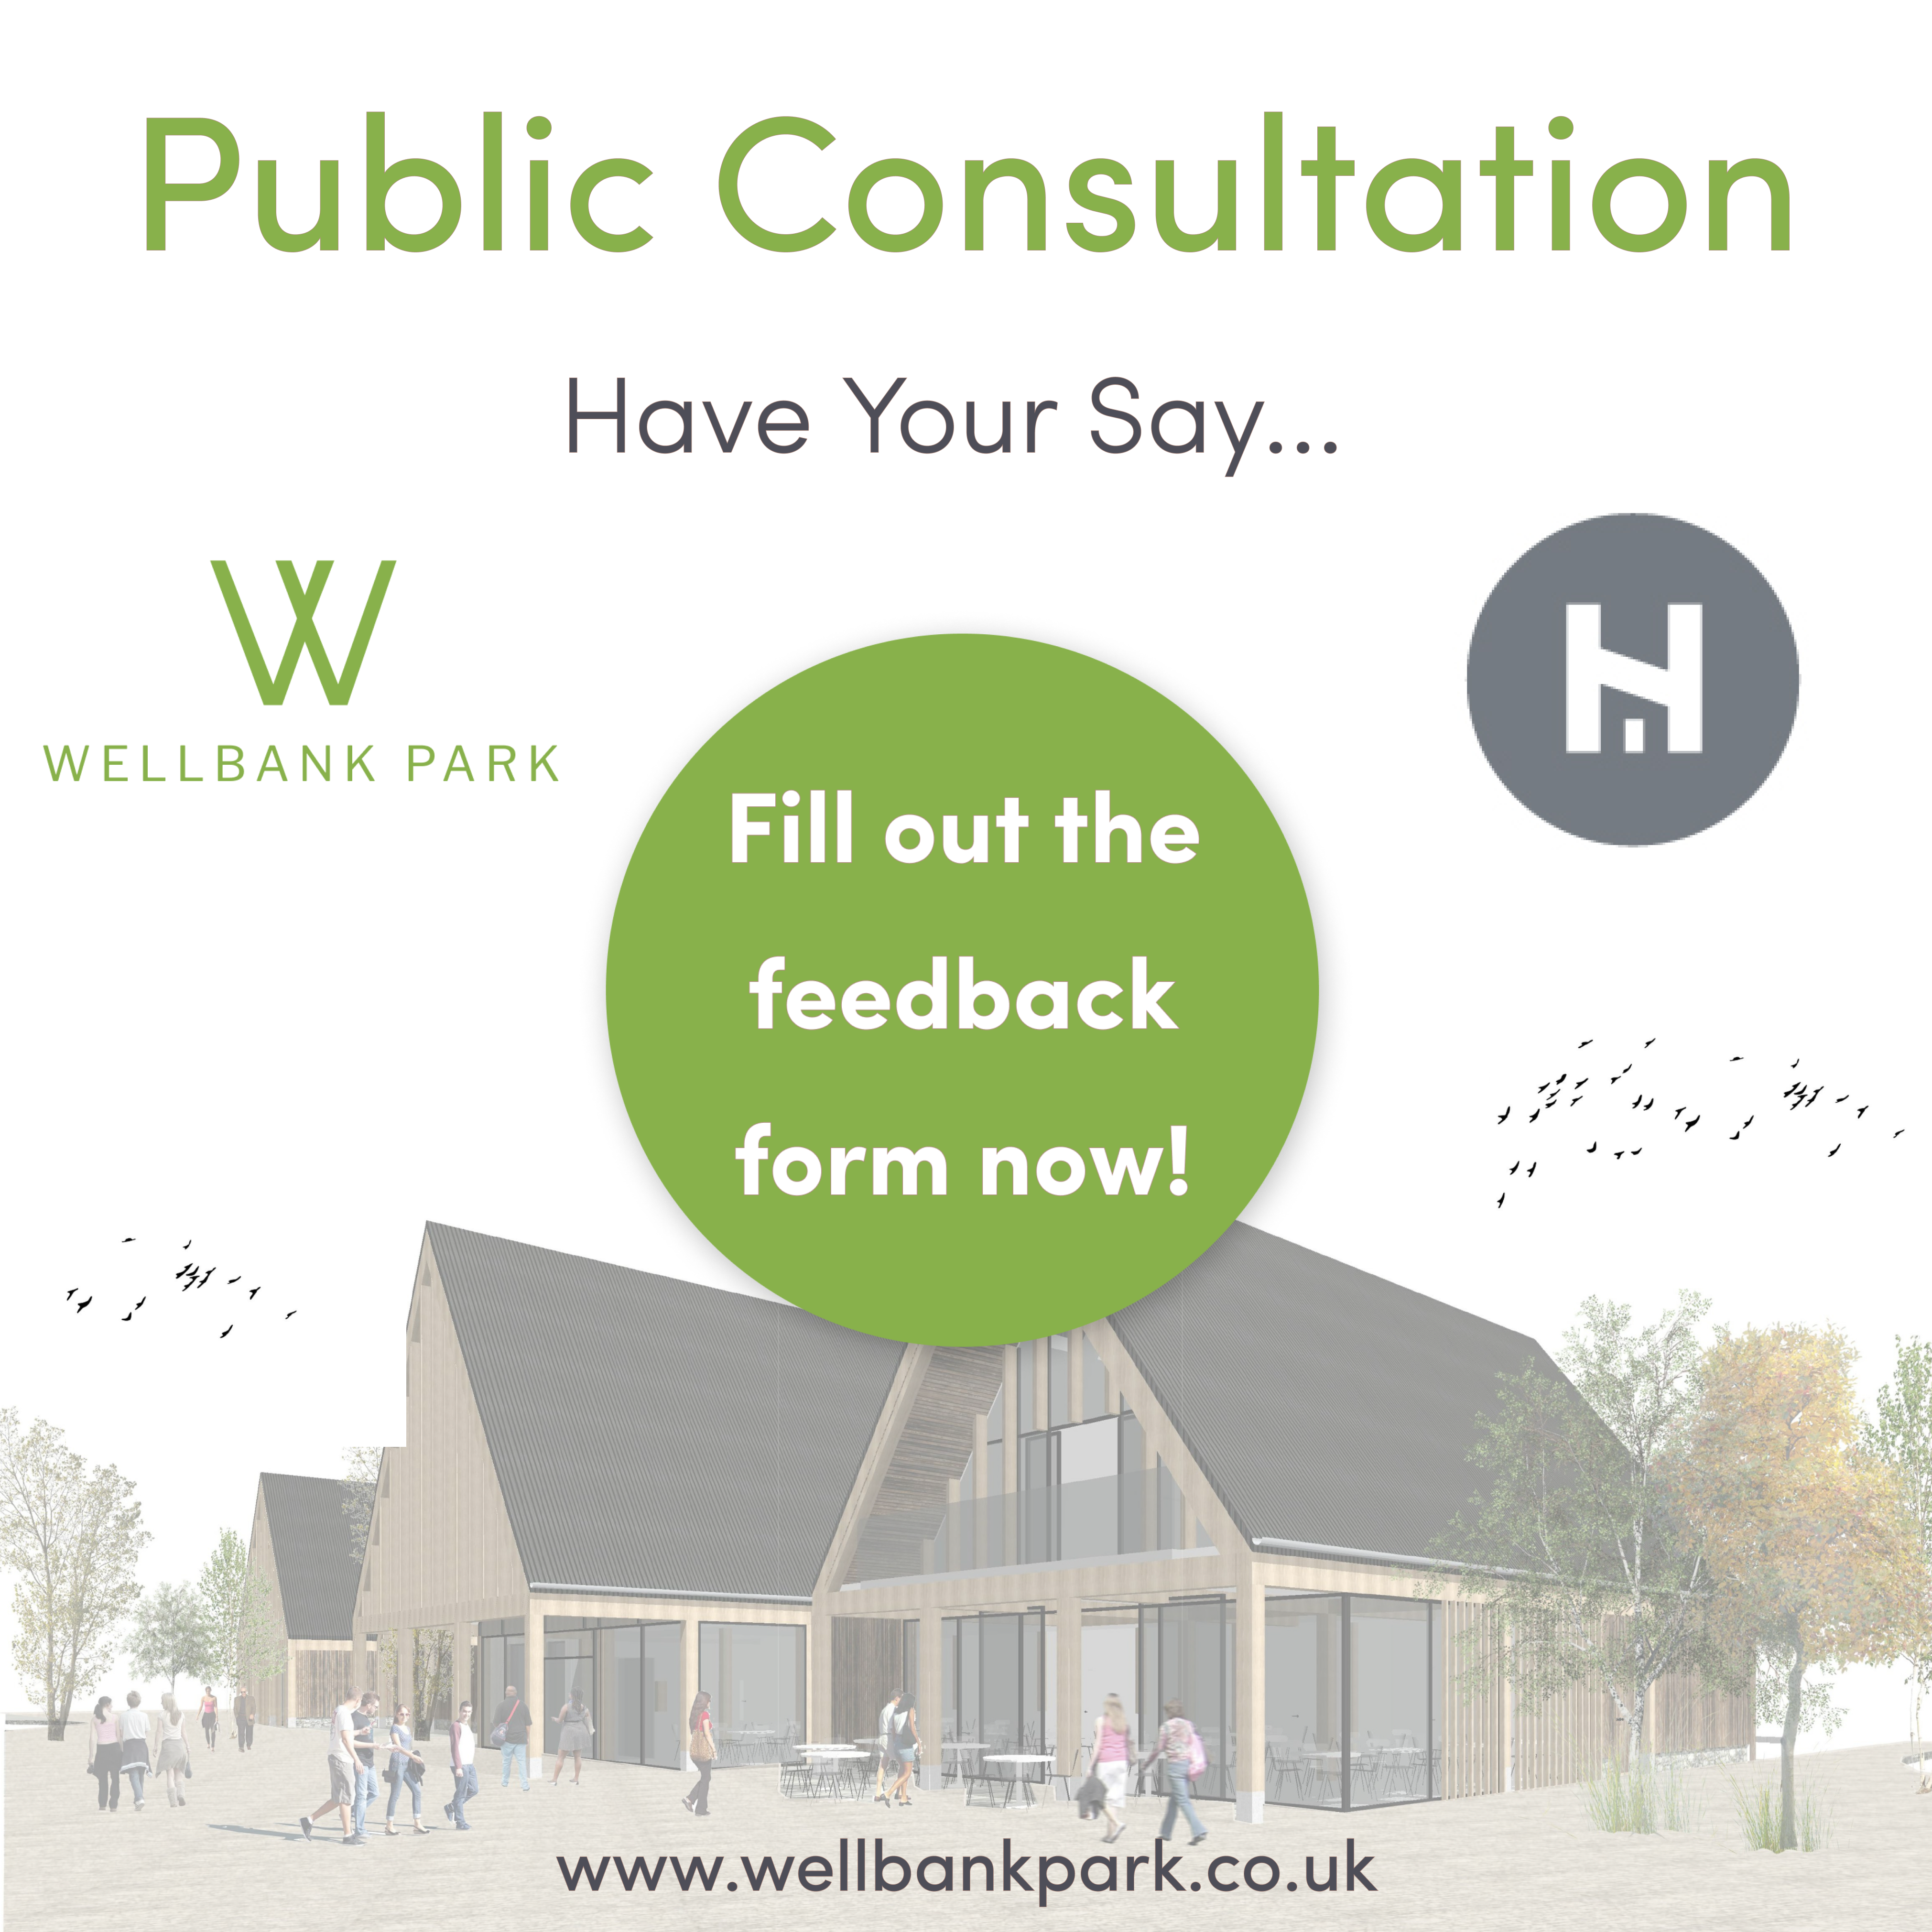 Public Consultation – Have Your Say About Wellbank